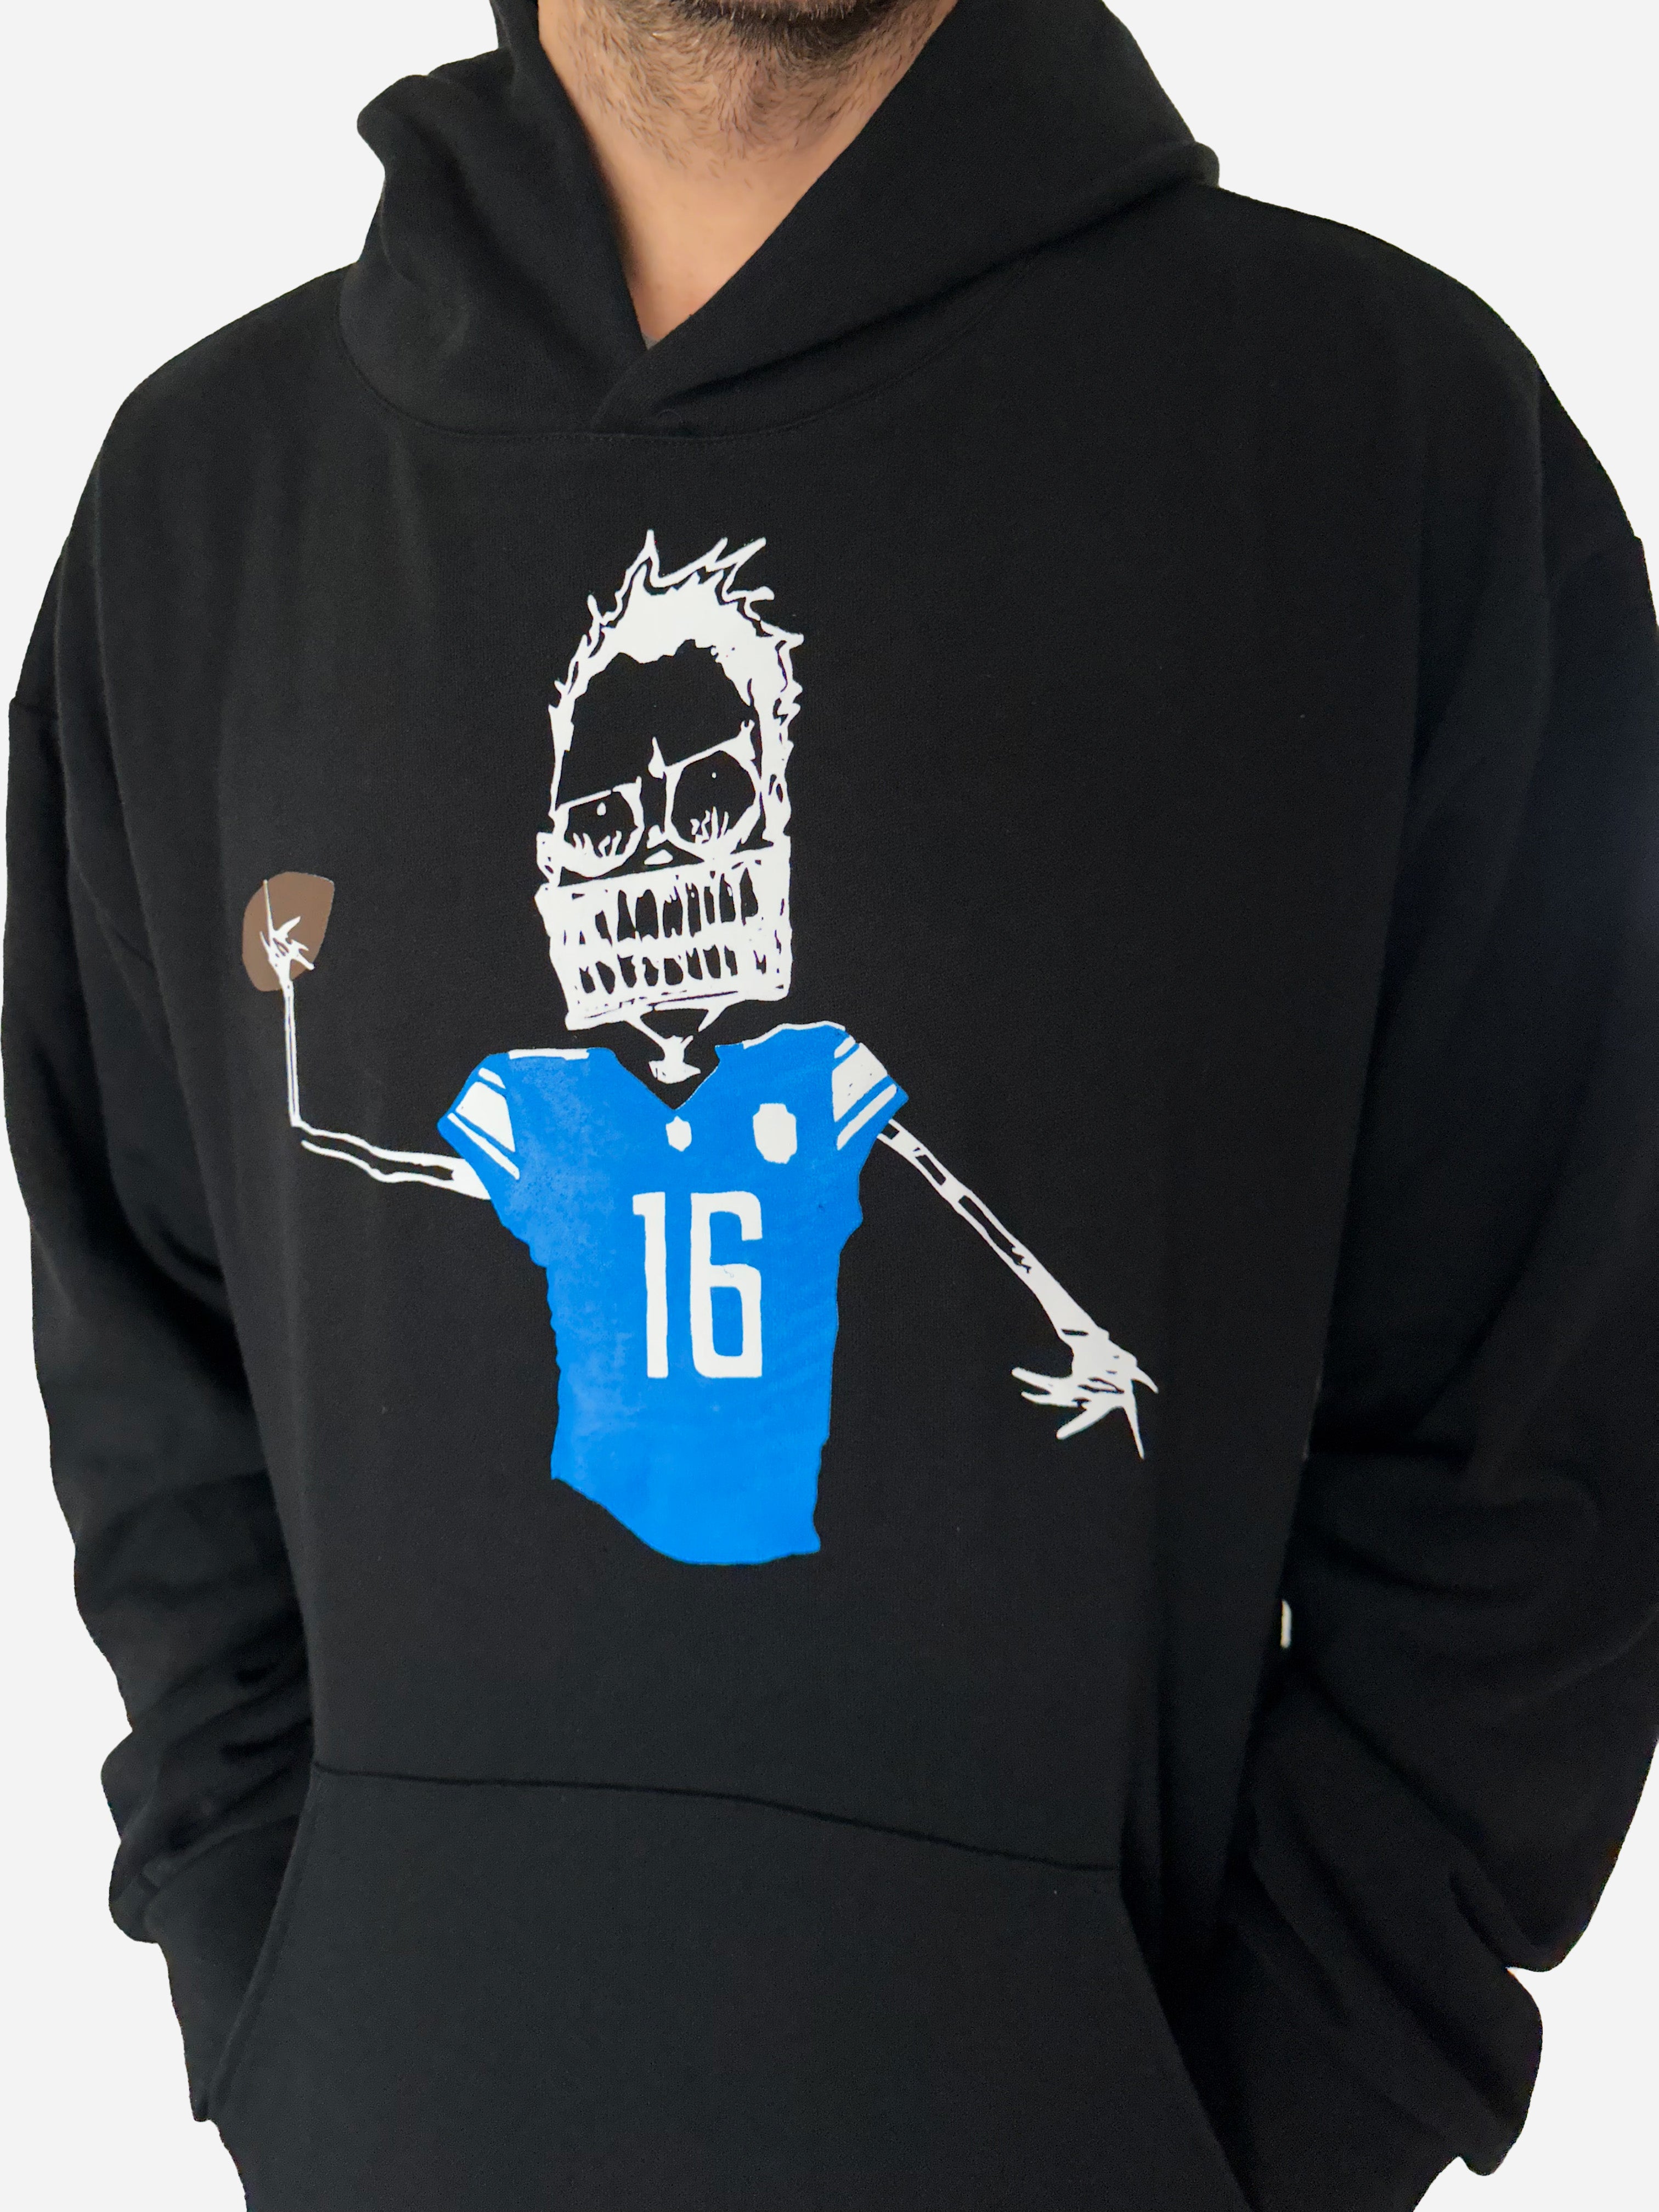 LIONS x TIC limited edition hoodie